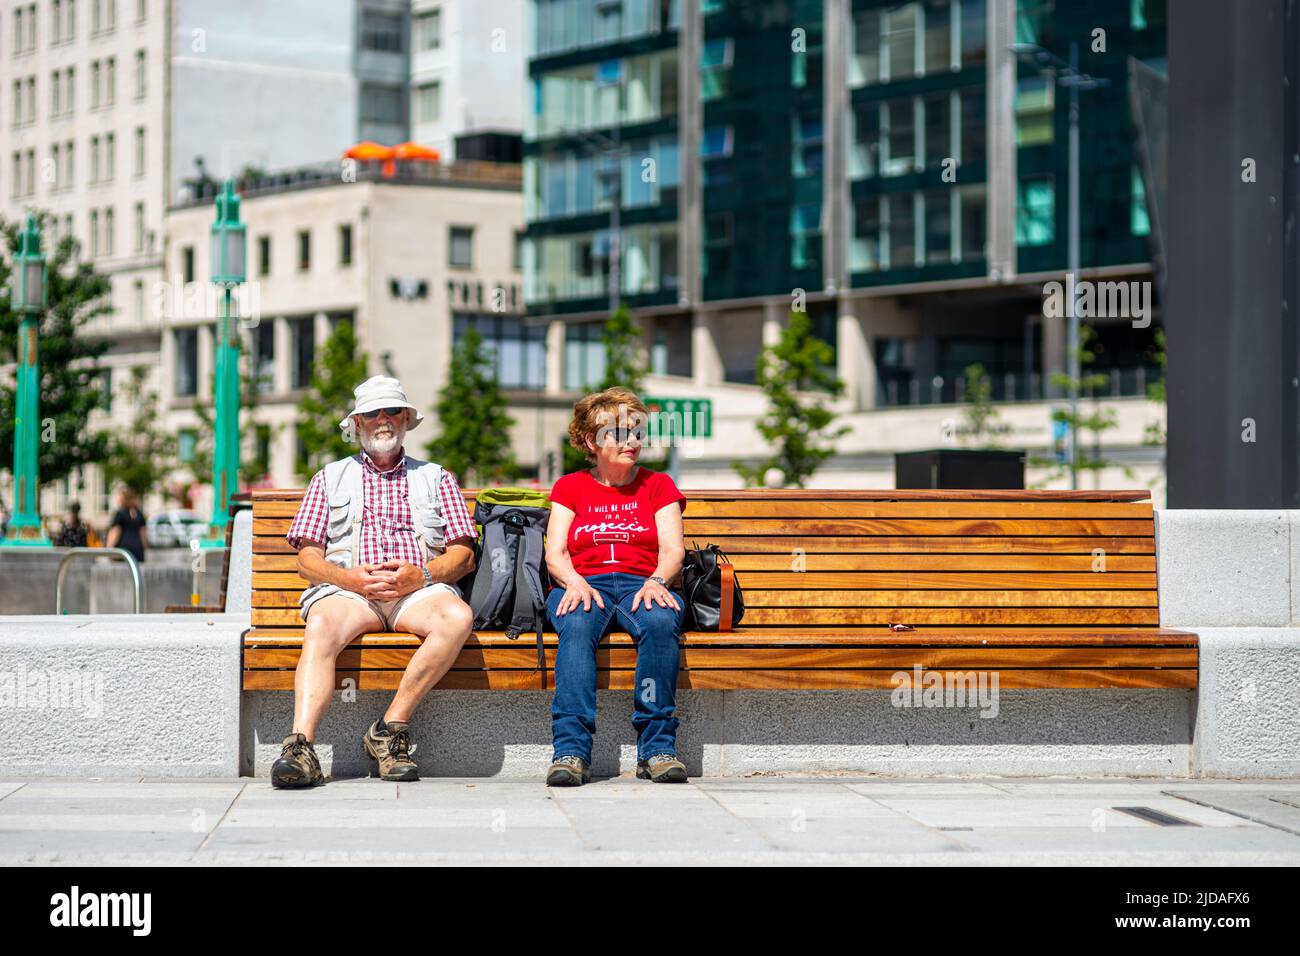 Candid photograph of man and woman couple sitting on a bench in Liverpool, England, UK on a warm sunny day Stock Photo